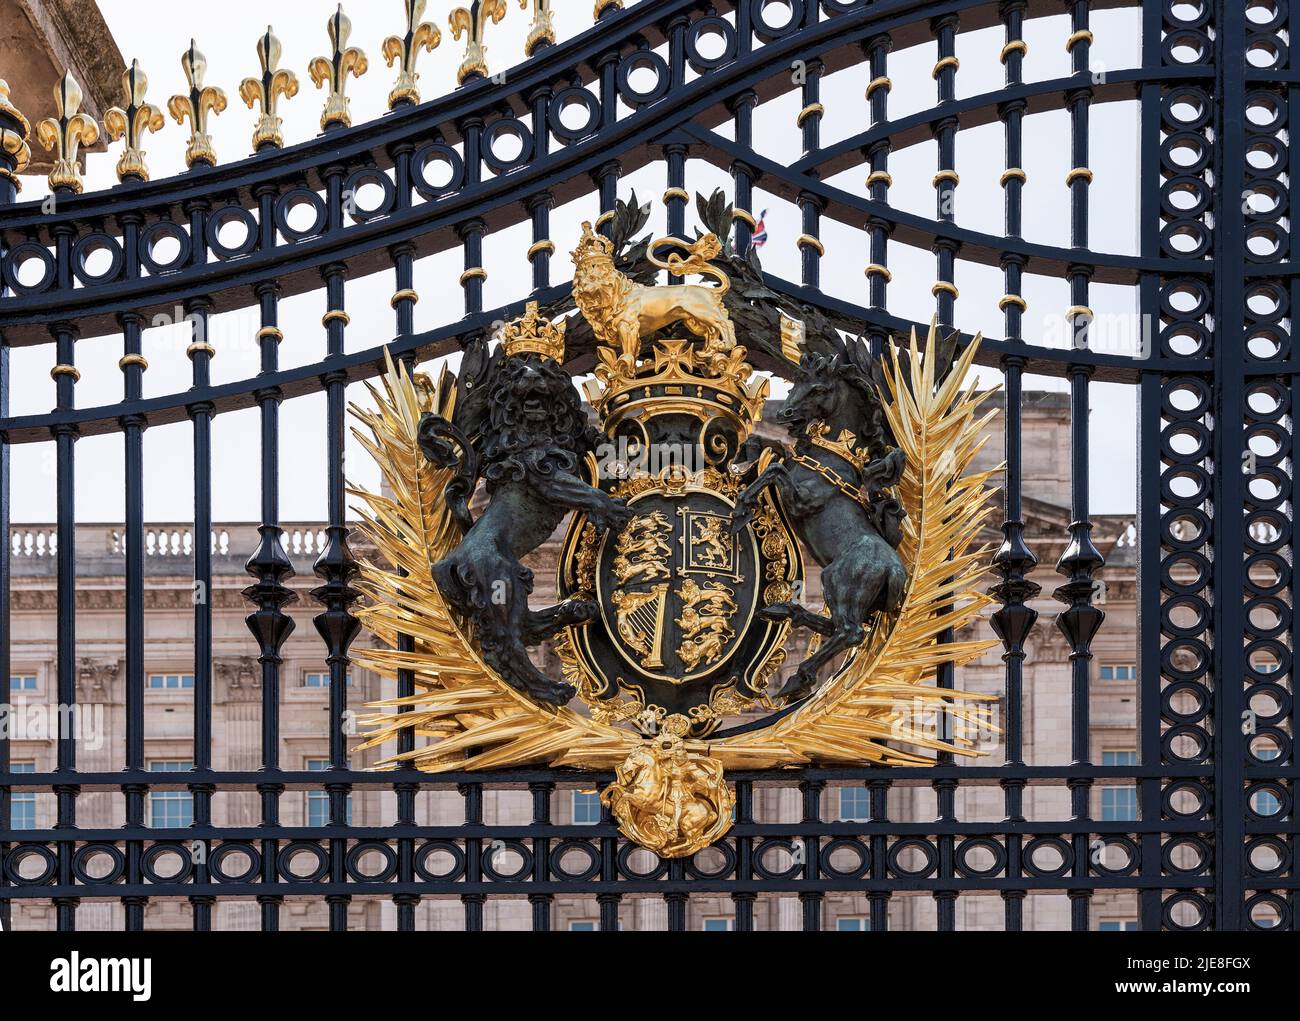 Royal coat of arms of the United Kingdom, with rampant crowned lion and Unicorn, on the gate of Buckingham Palace, London, England, UK Stock Photo